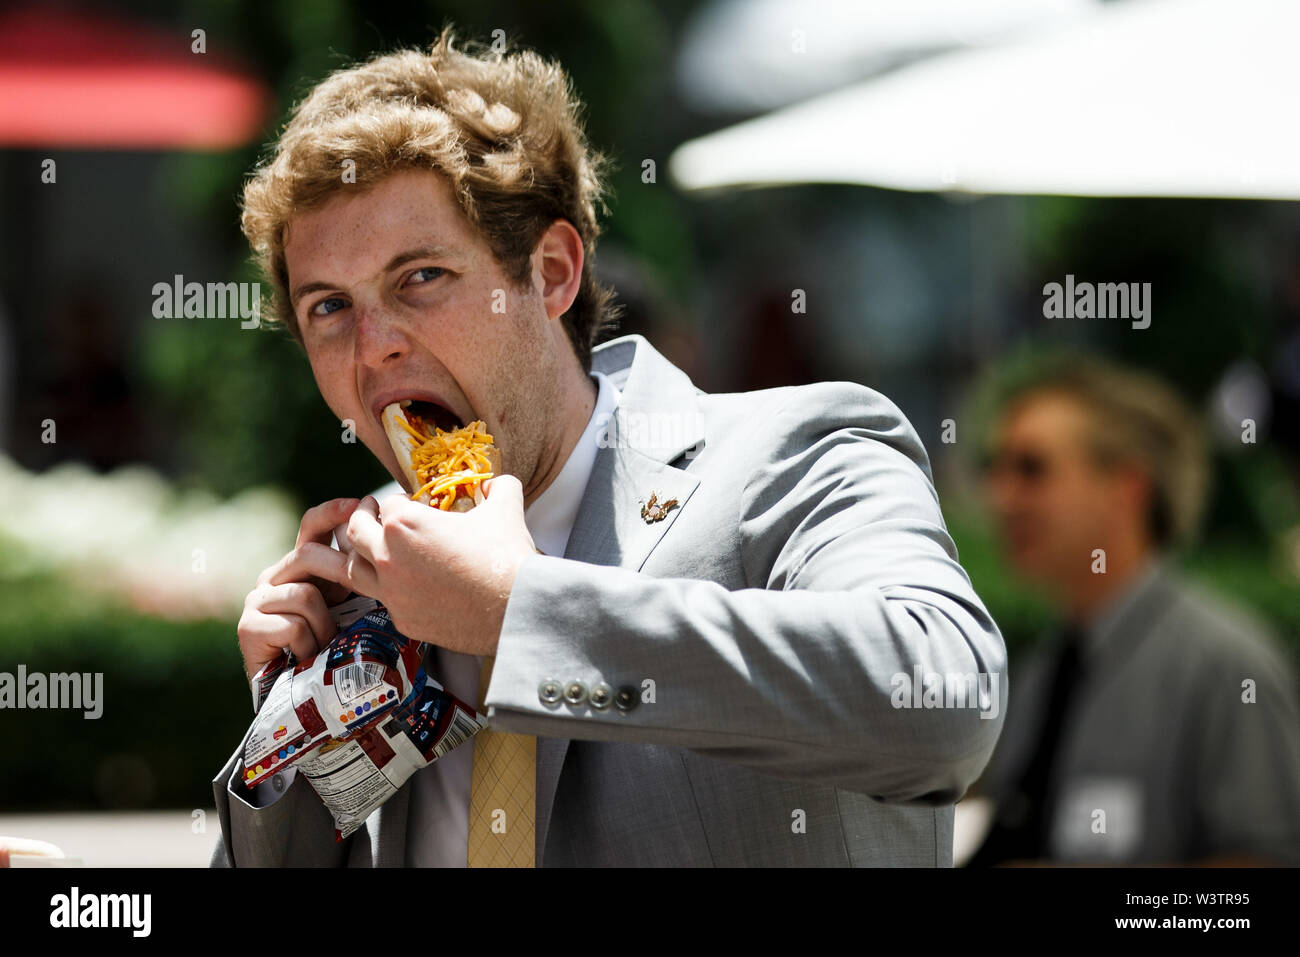 Washington, USA. 17th July, 2019. A man eats a hot dog during the annual Hot Dog Lunch event at the Rayburn House Office Building on Capitol Hill in Washington, DC, the United States, on July 17, 2019. The event was held here on Wednesday in celebration of the National Hot Dog Day. Credit: Ting Shen/Xinhua/Alamy Live News Stock Photo